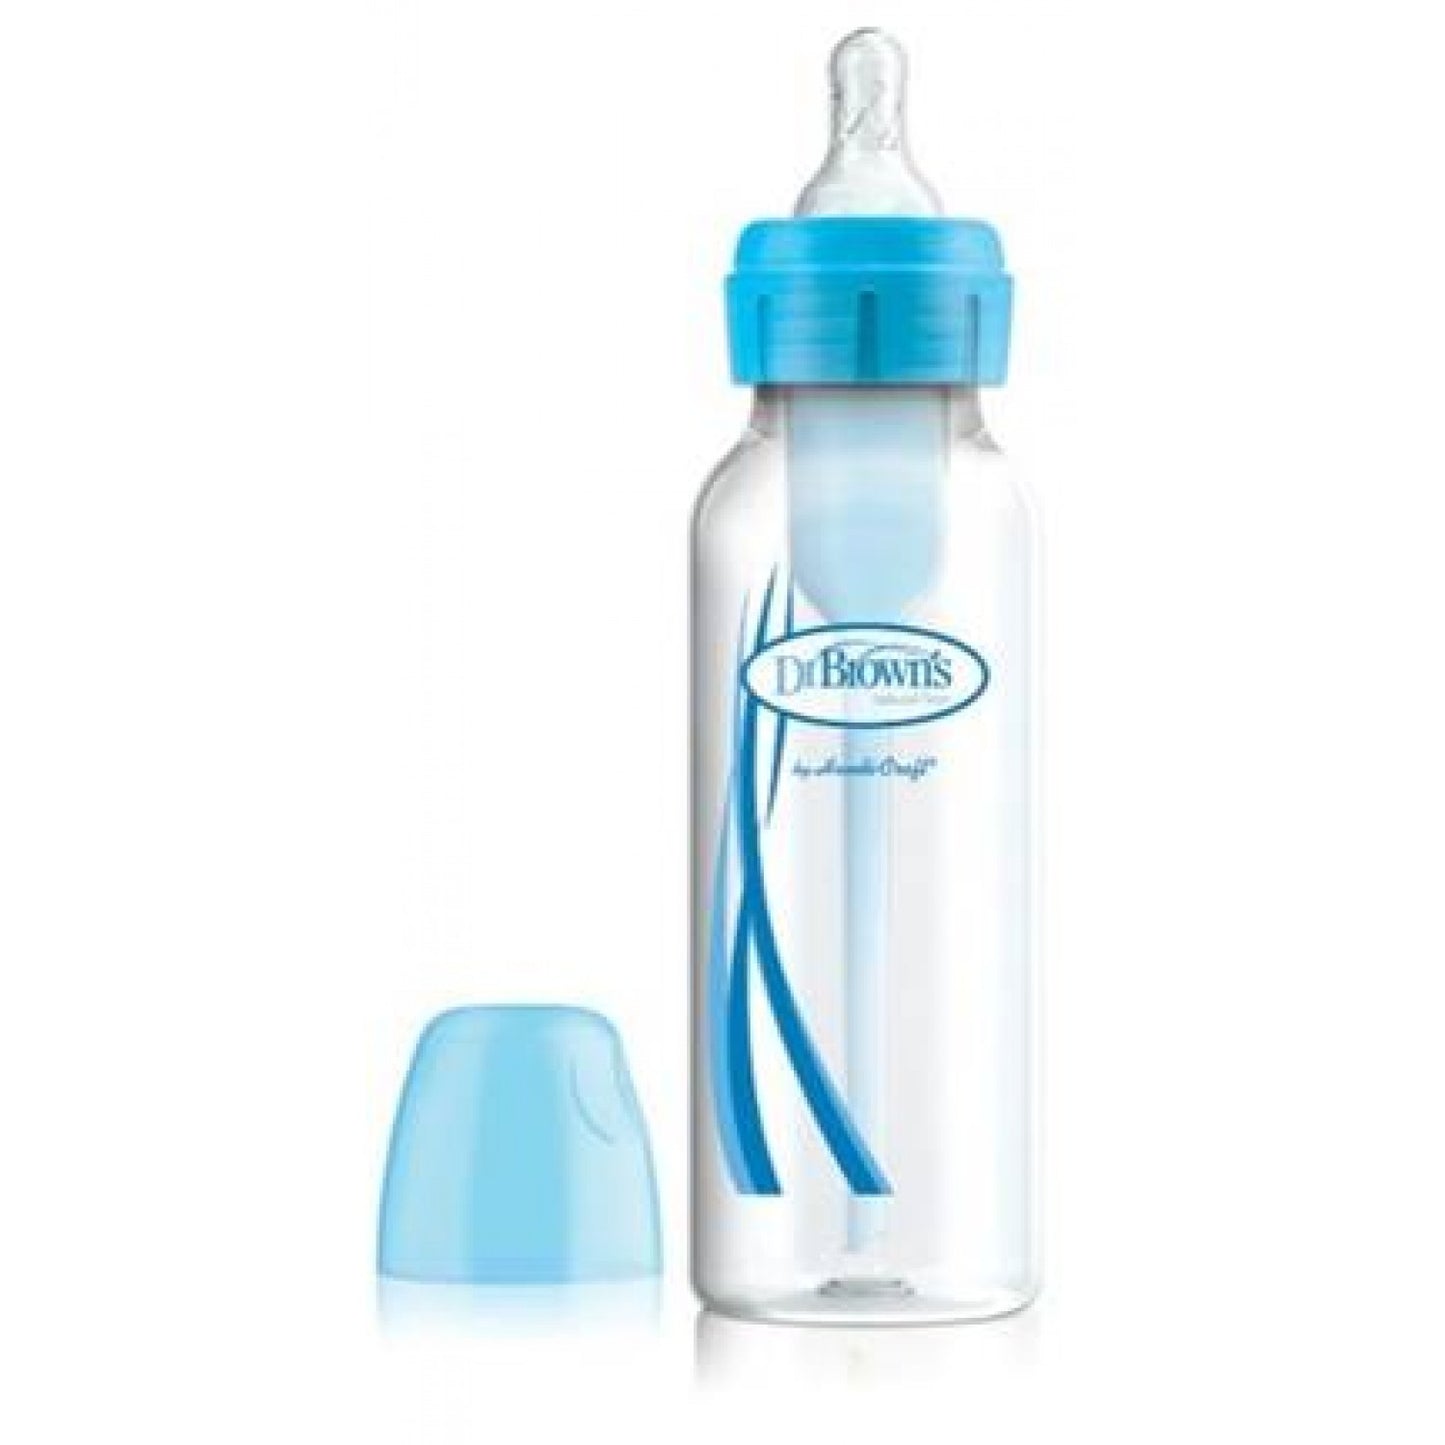 Dr. Brown's Specialty Narrow Feeding System Bottle - 250ml